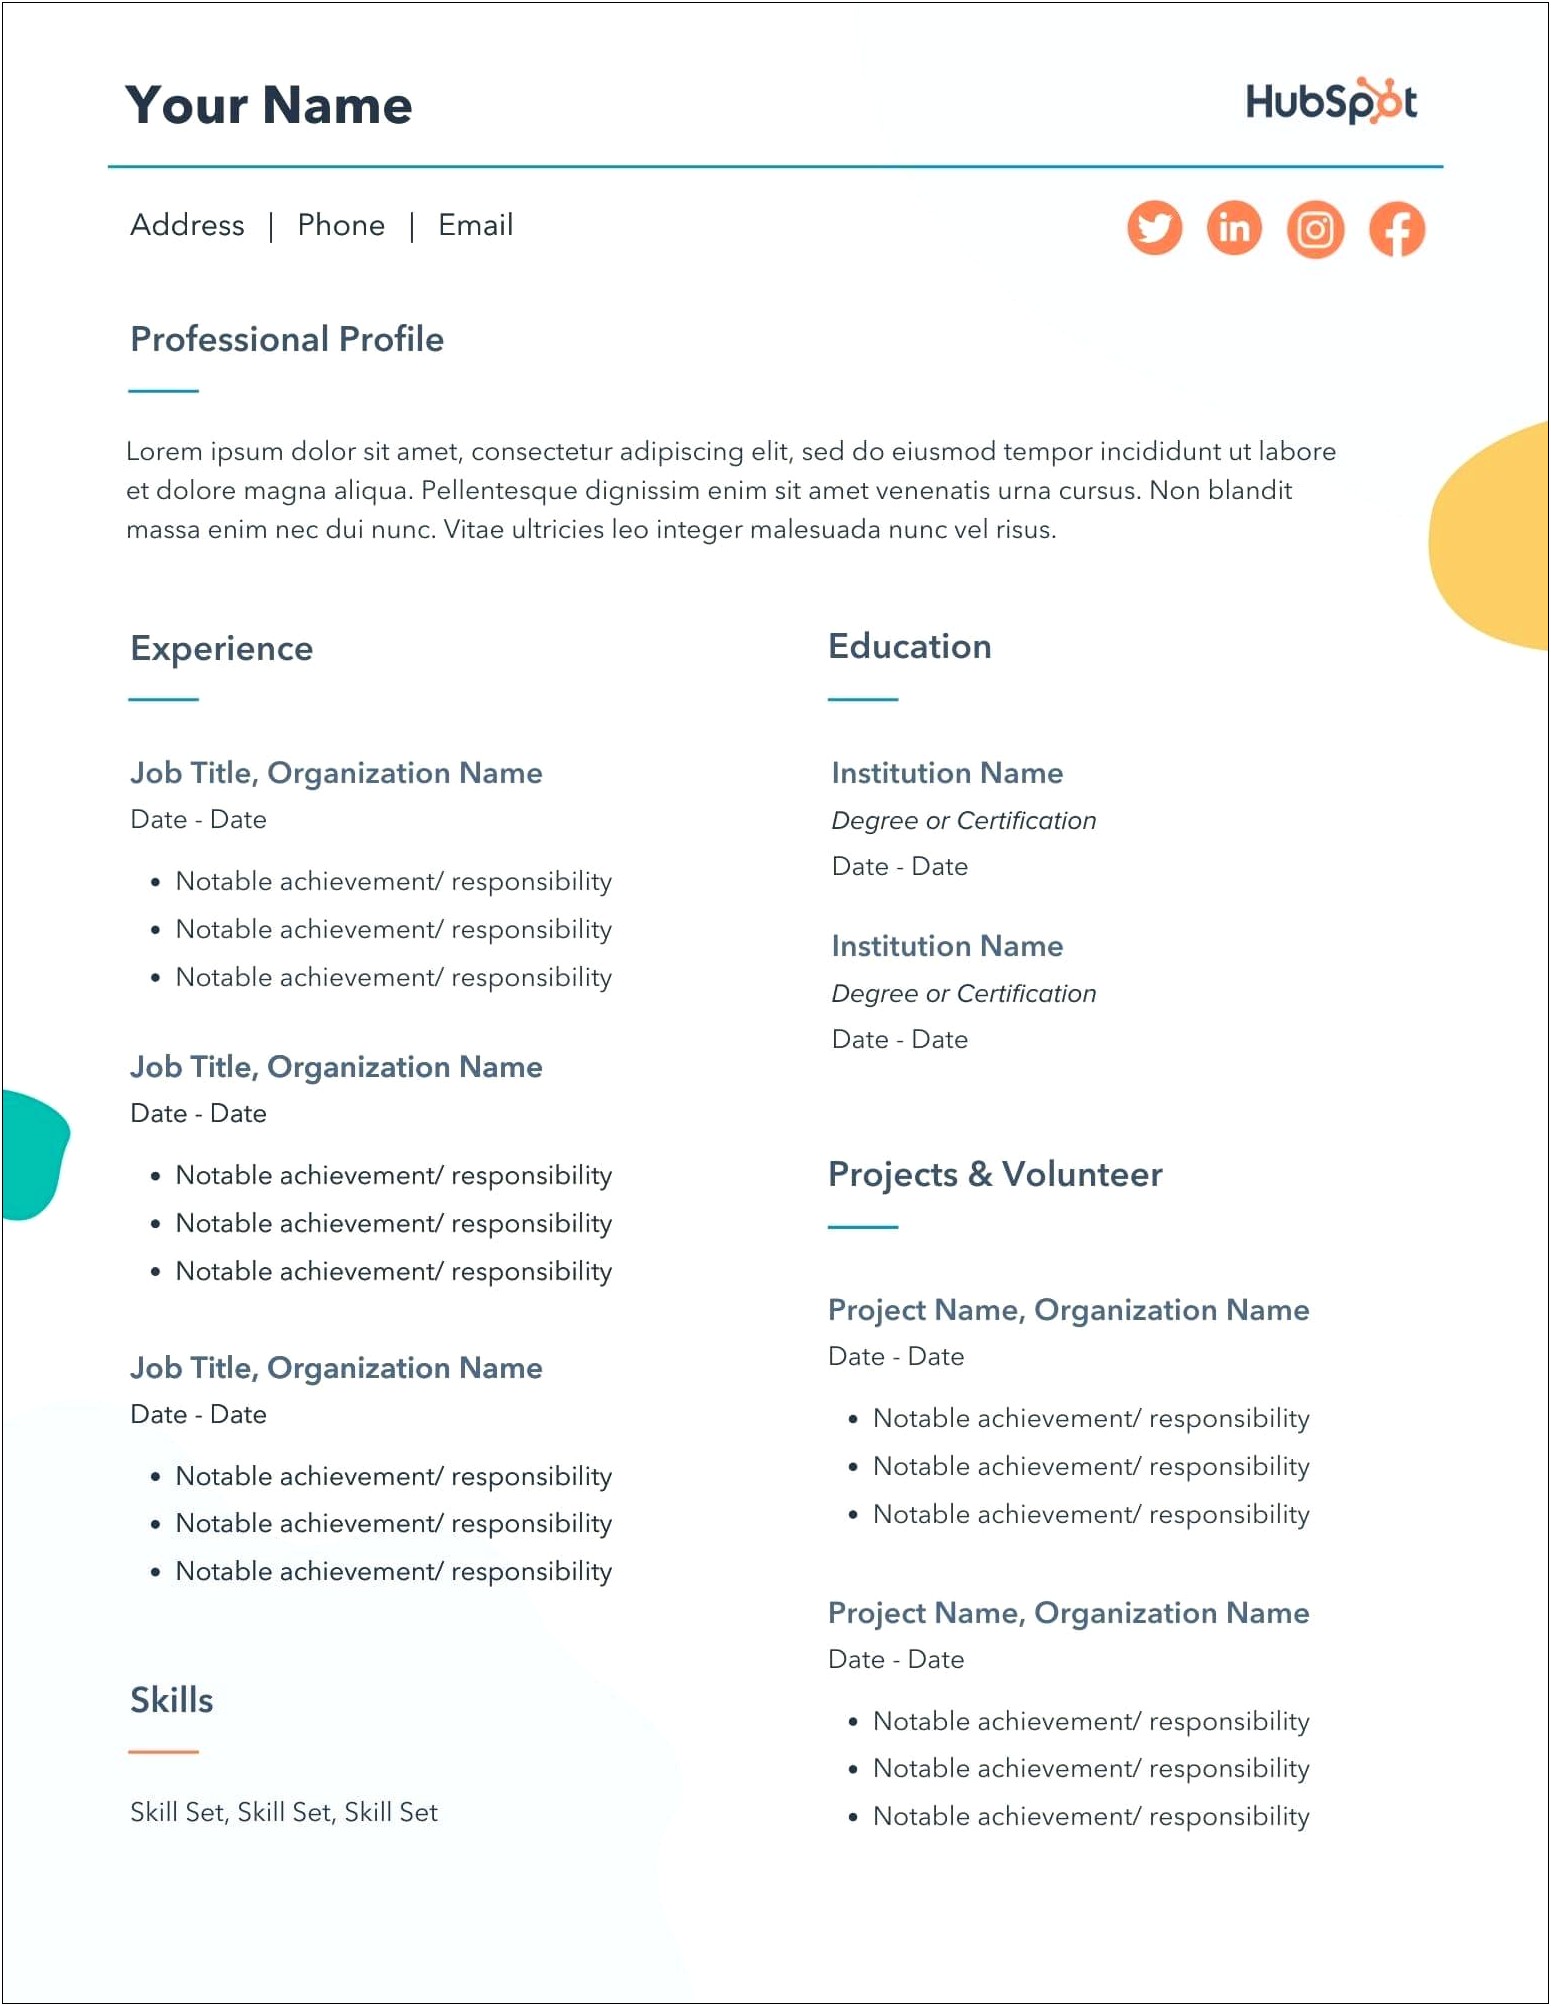 Samples Of Professional Resume Formats